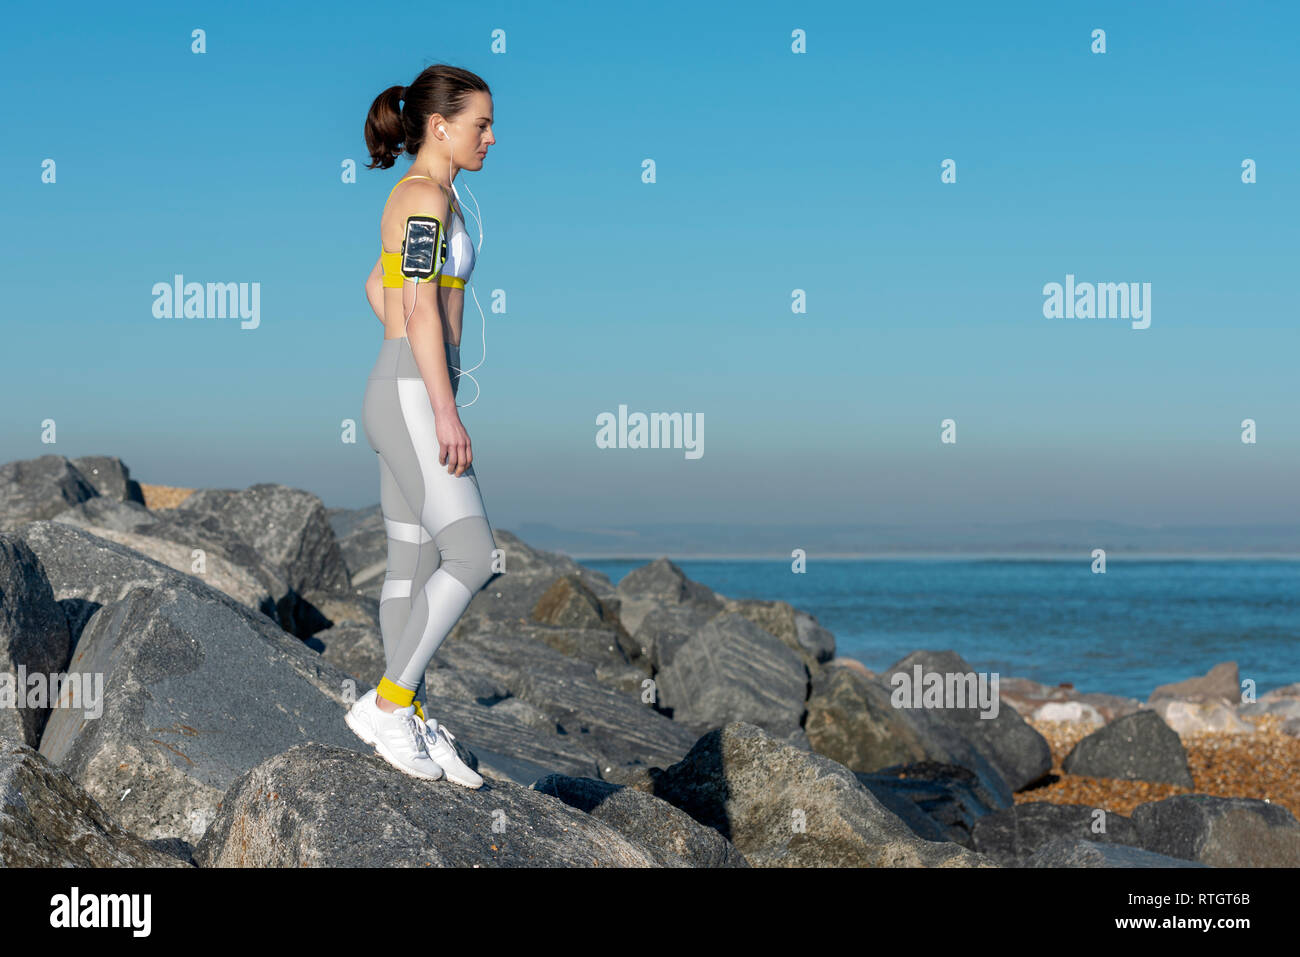 woman wearing sportswear standing on rocks by the sea listening to music on her phone on her armband. Stock Photo